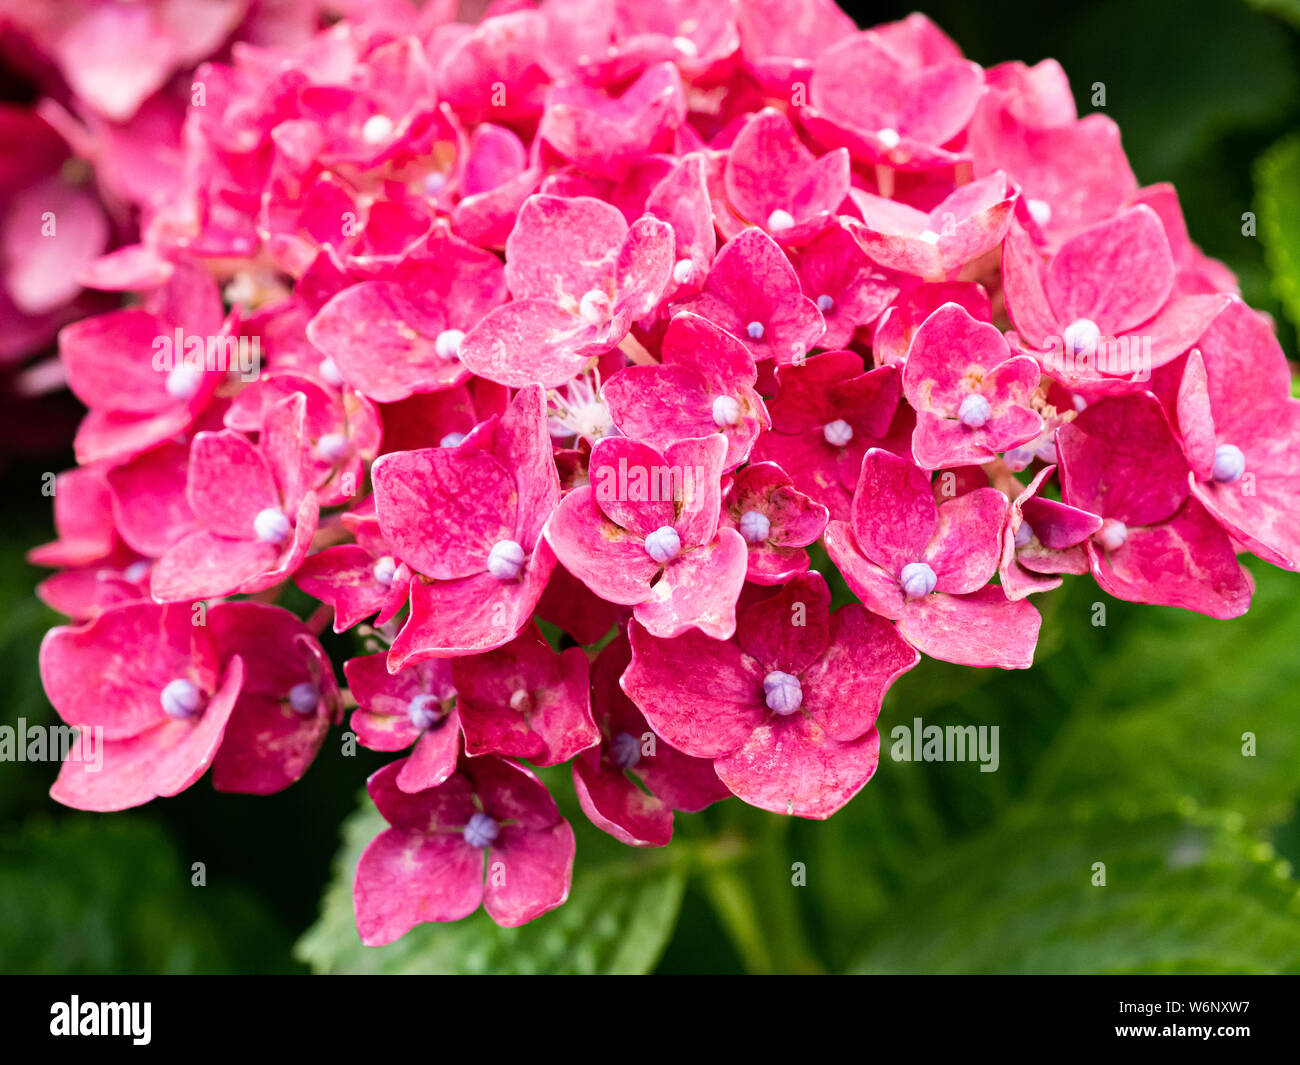 A cluster of red hydrangeas bloom beside a hiking path in central Japan. This bright clustered flowers are popular across Japan in the summer. Stock Photo